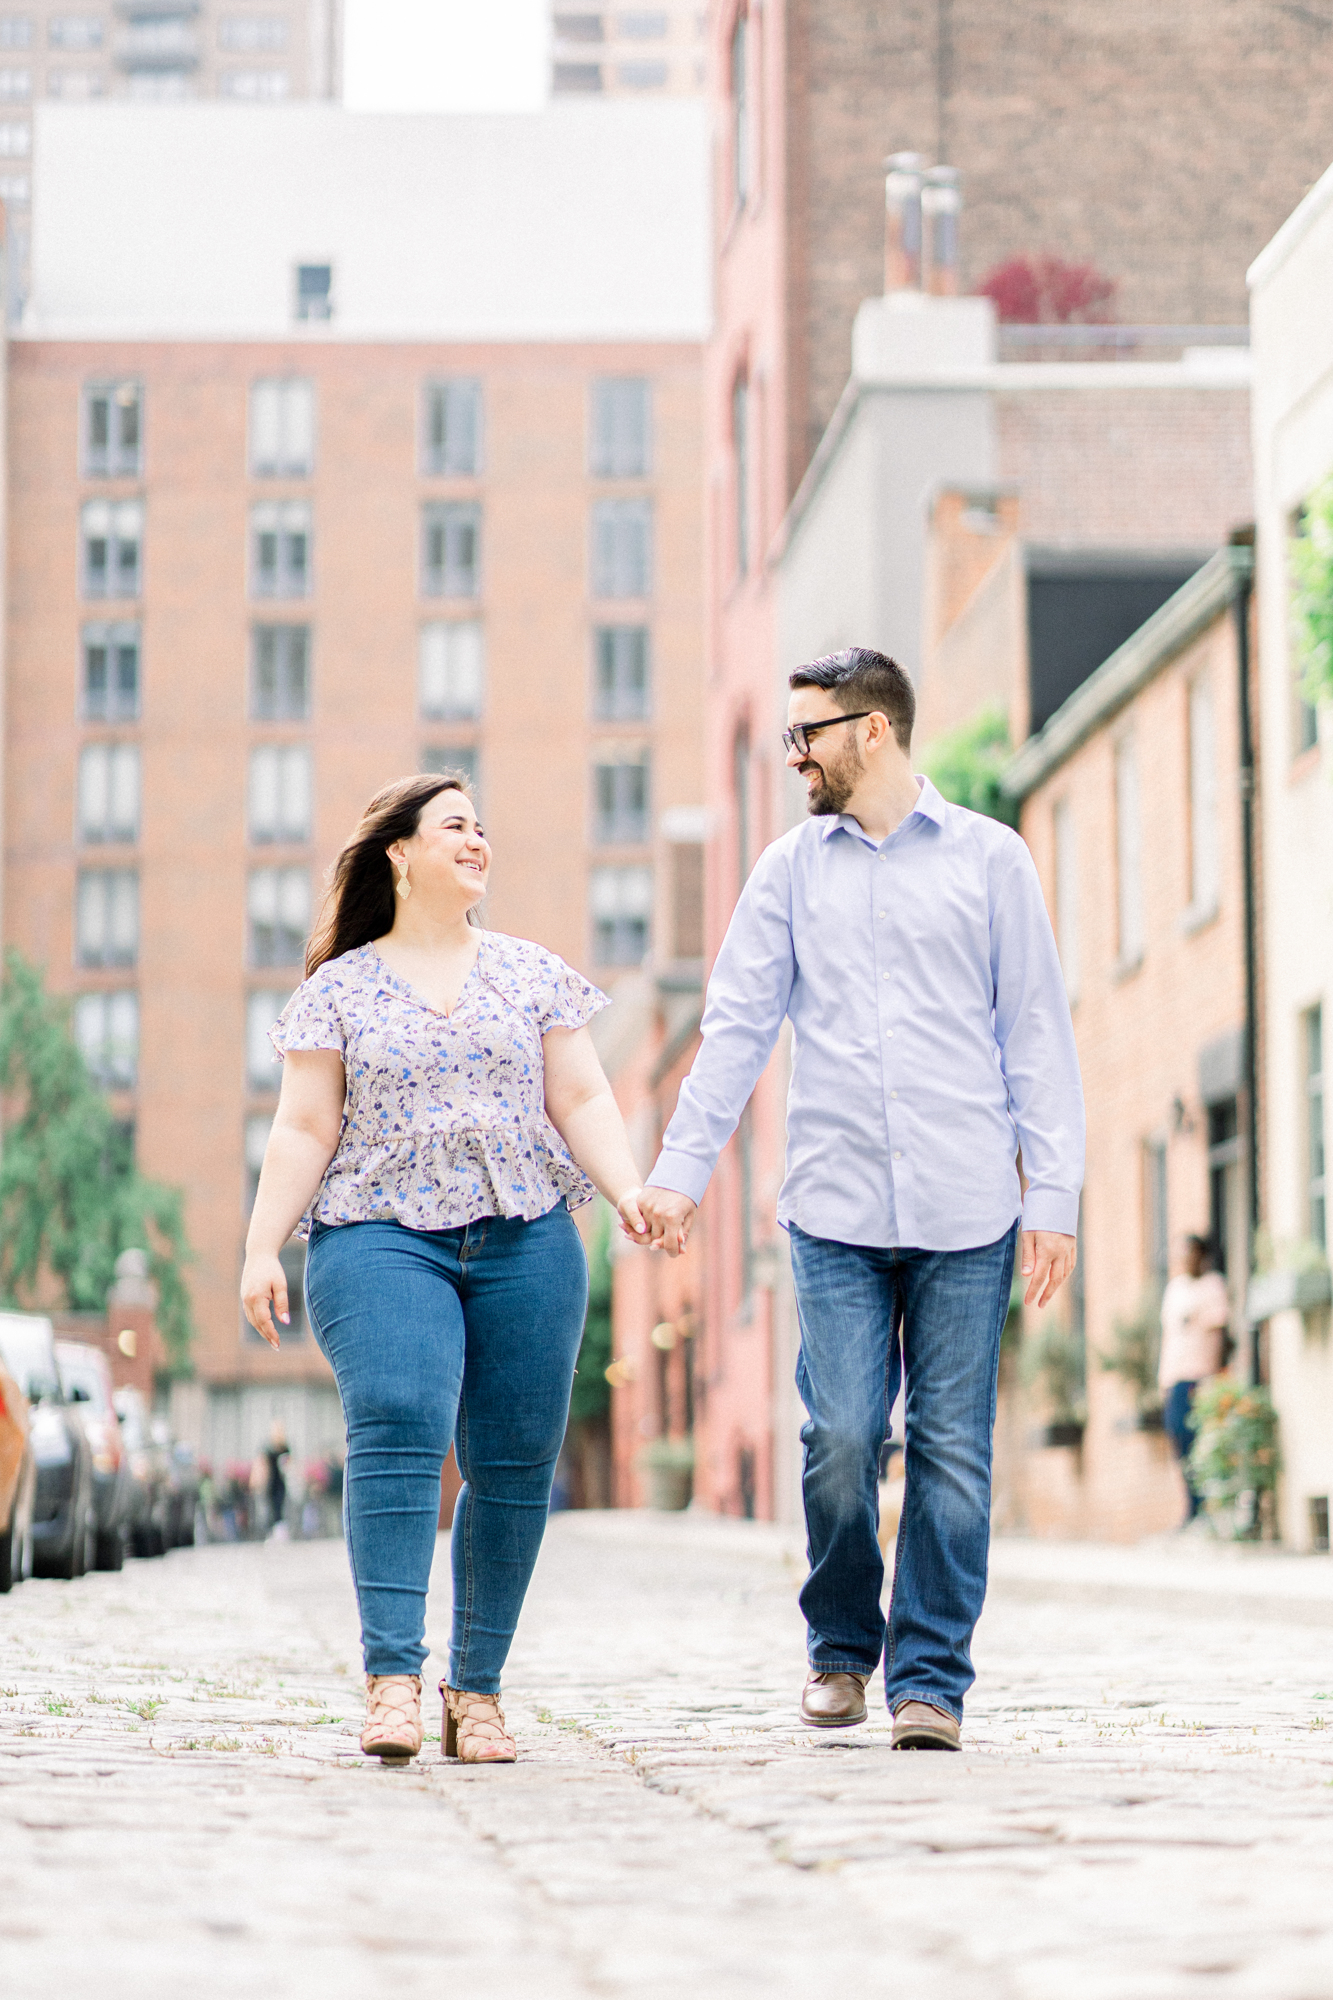 Fun Engagement Shoot in NYC